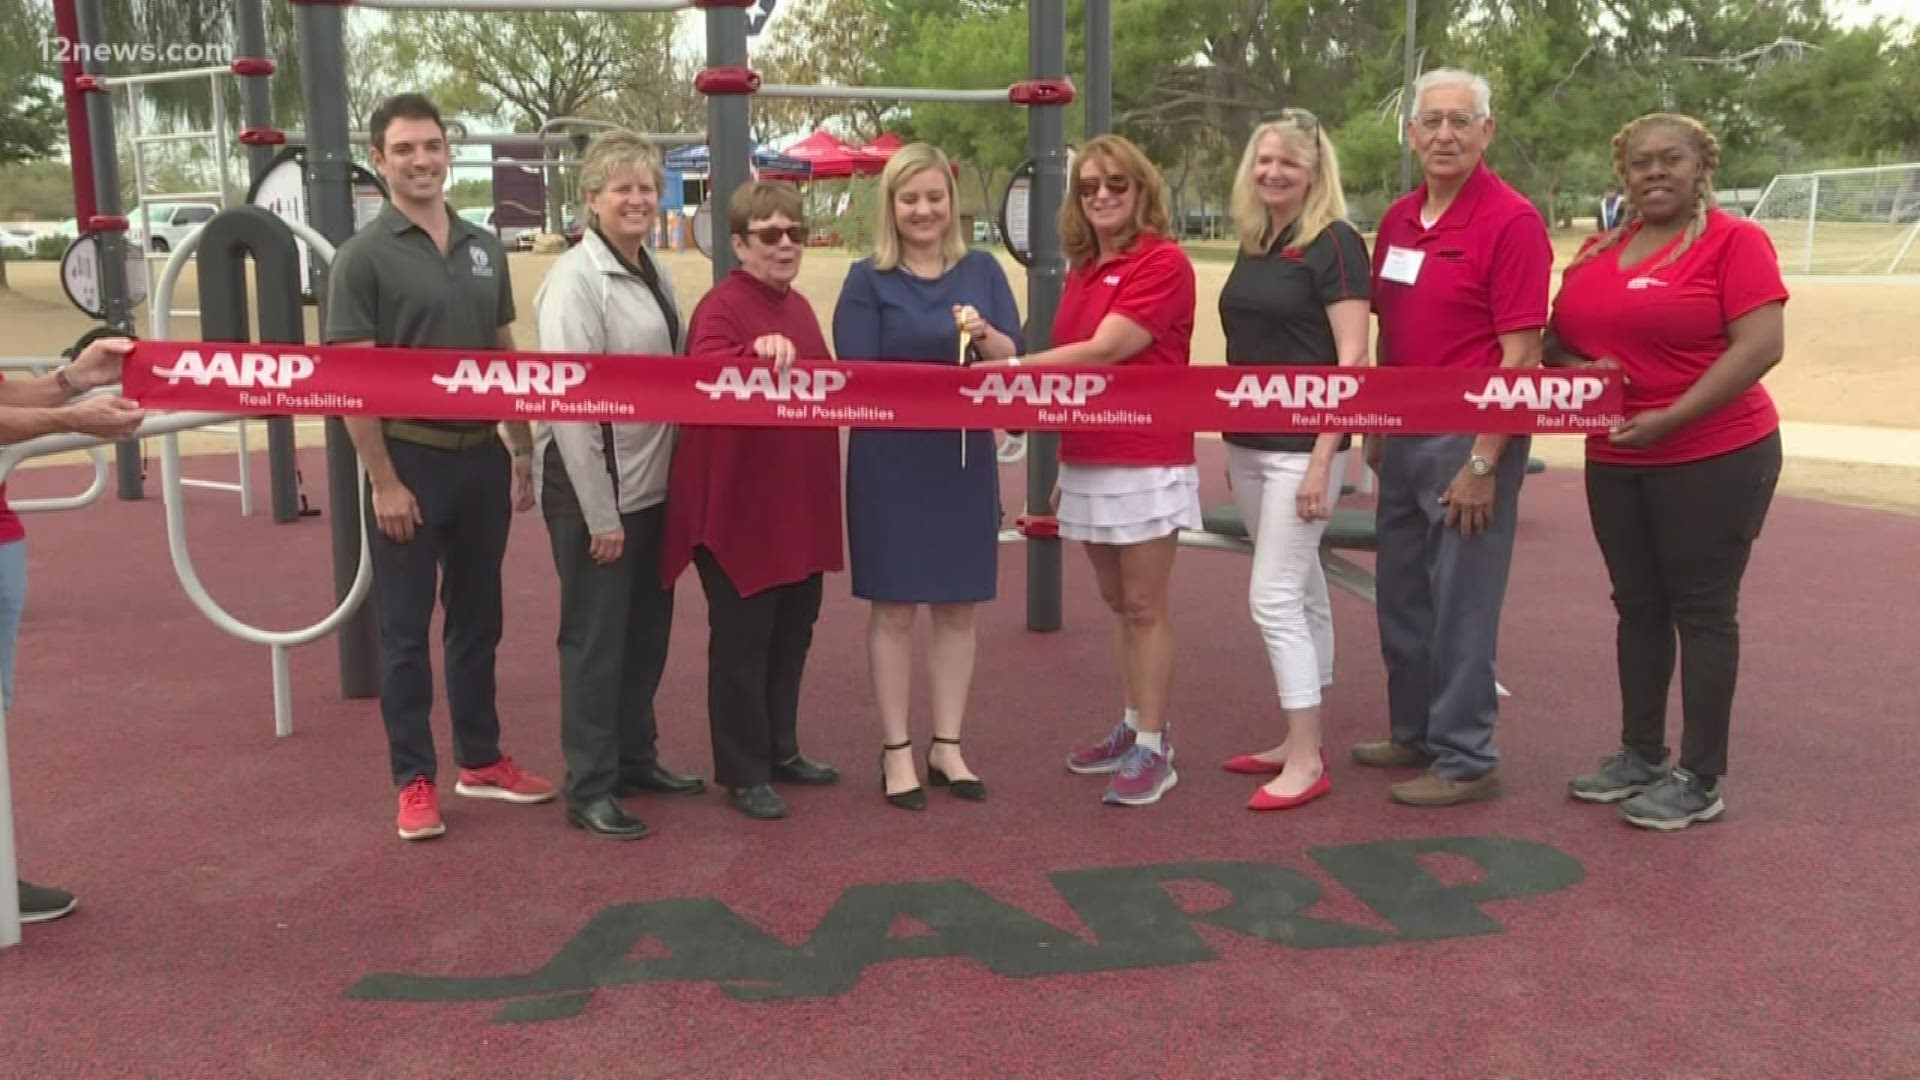 The AARP is helping people stay active outdoors by opening a fitness park in Phoenix. The city of Phoenix and AARP opened the park at the Rose Mofford Sports Complex